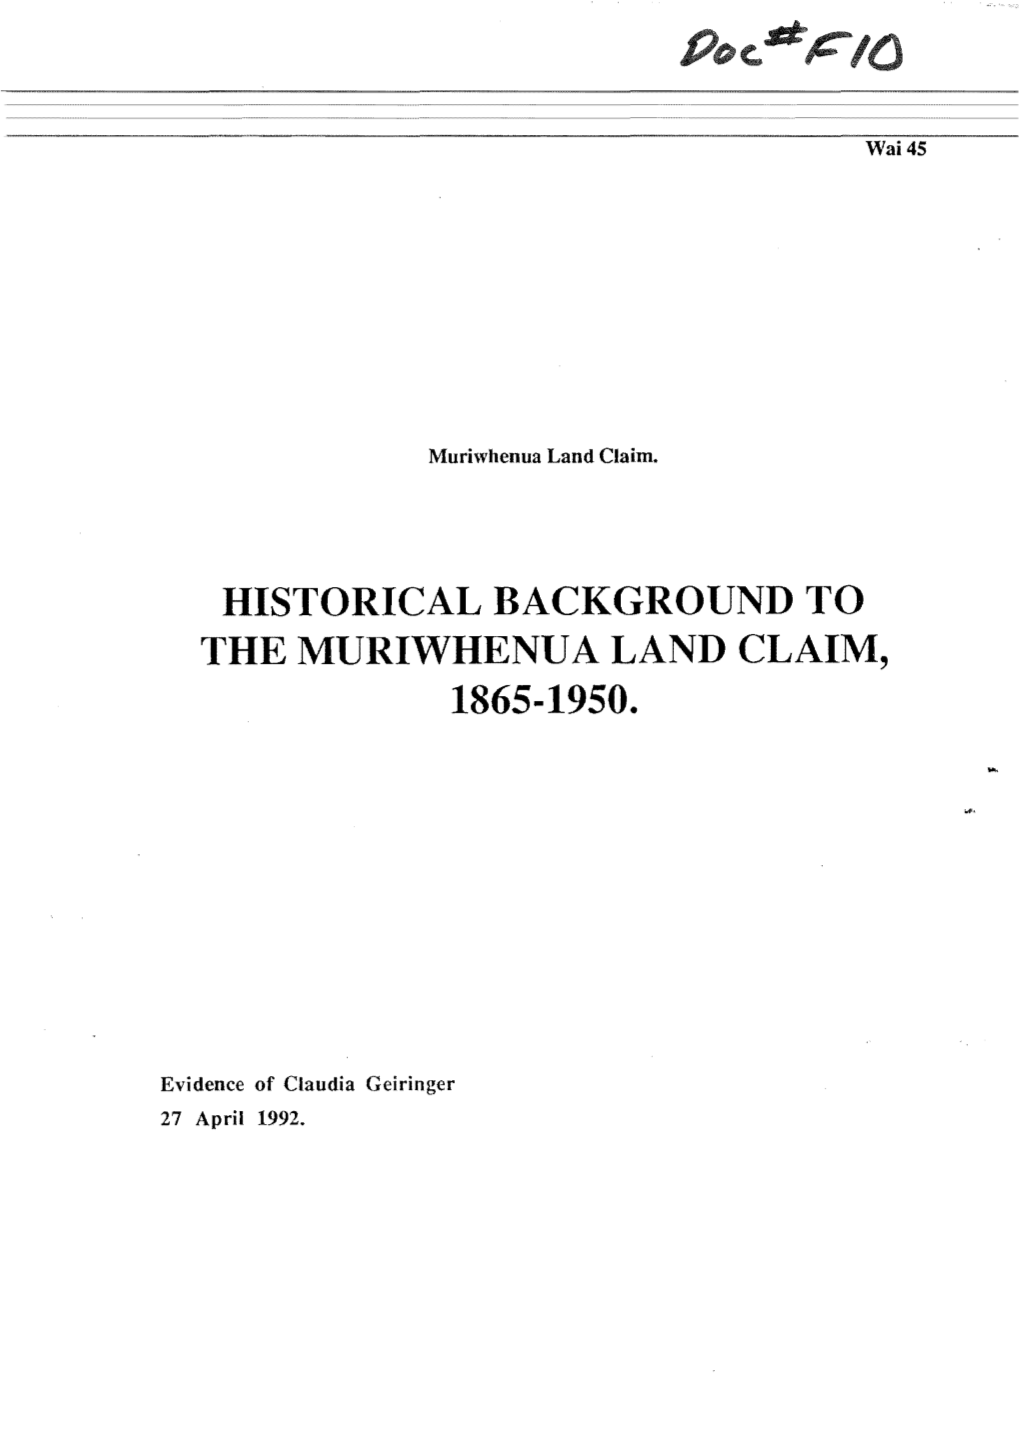 Historical Background to the Muriwhenu a Land Claim, 1865-1950